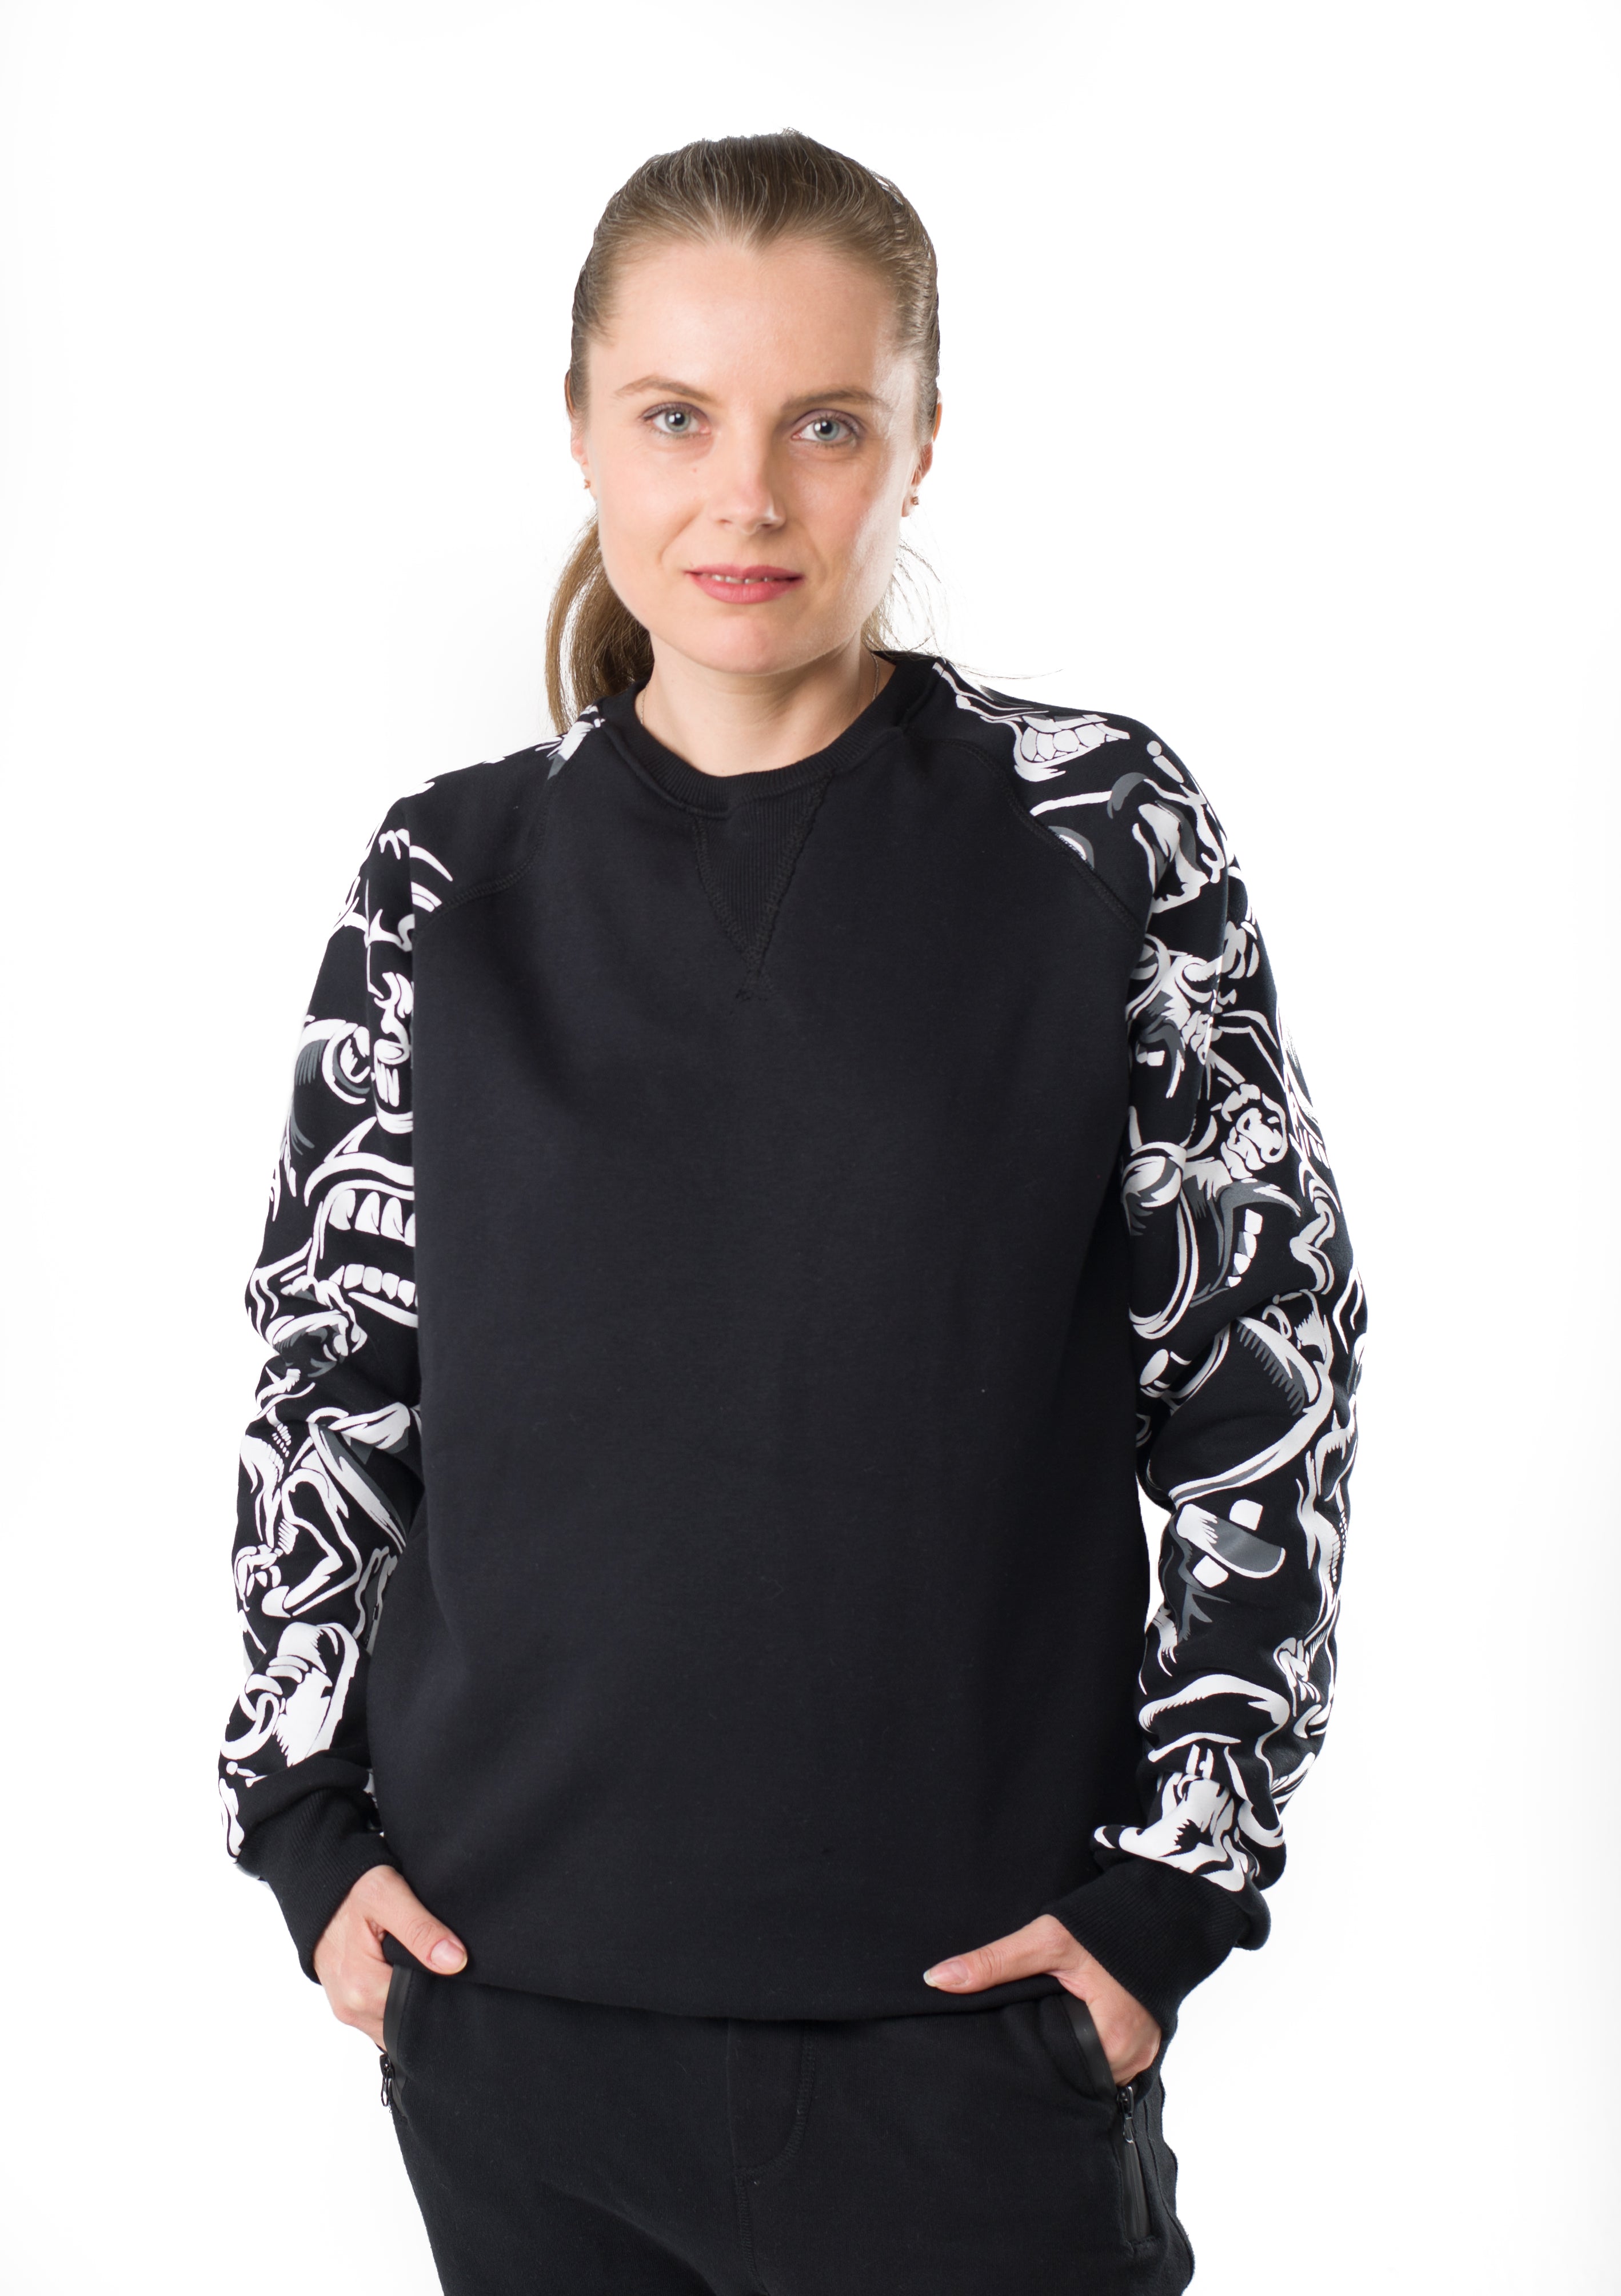 Cotton Printed jum-133- black For Her